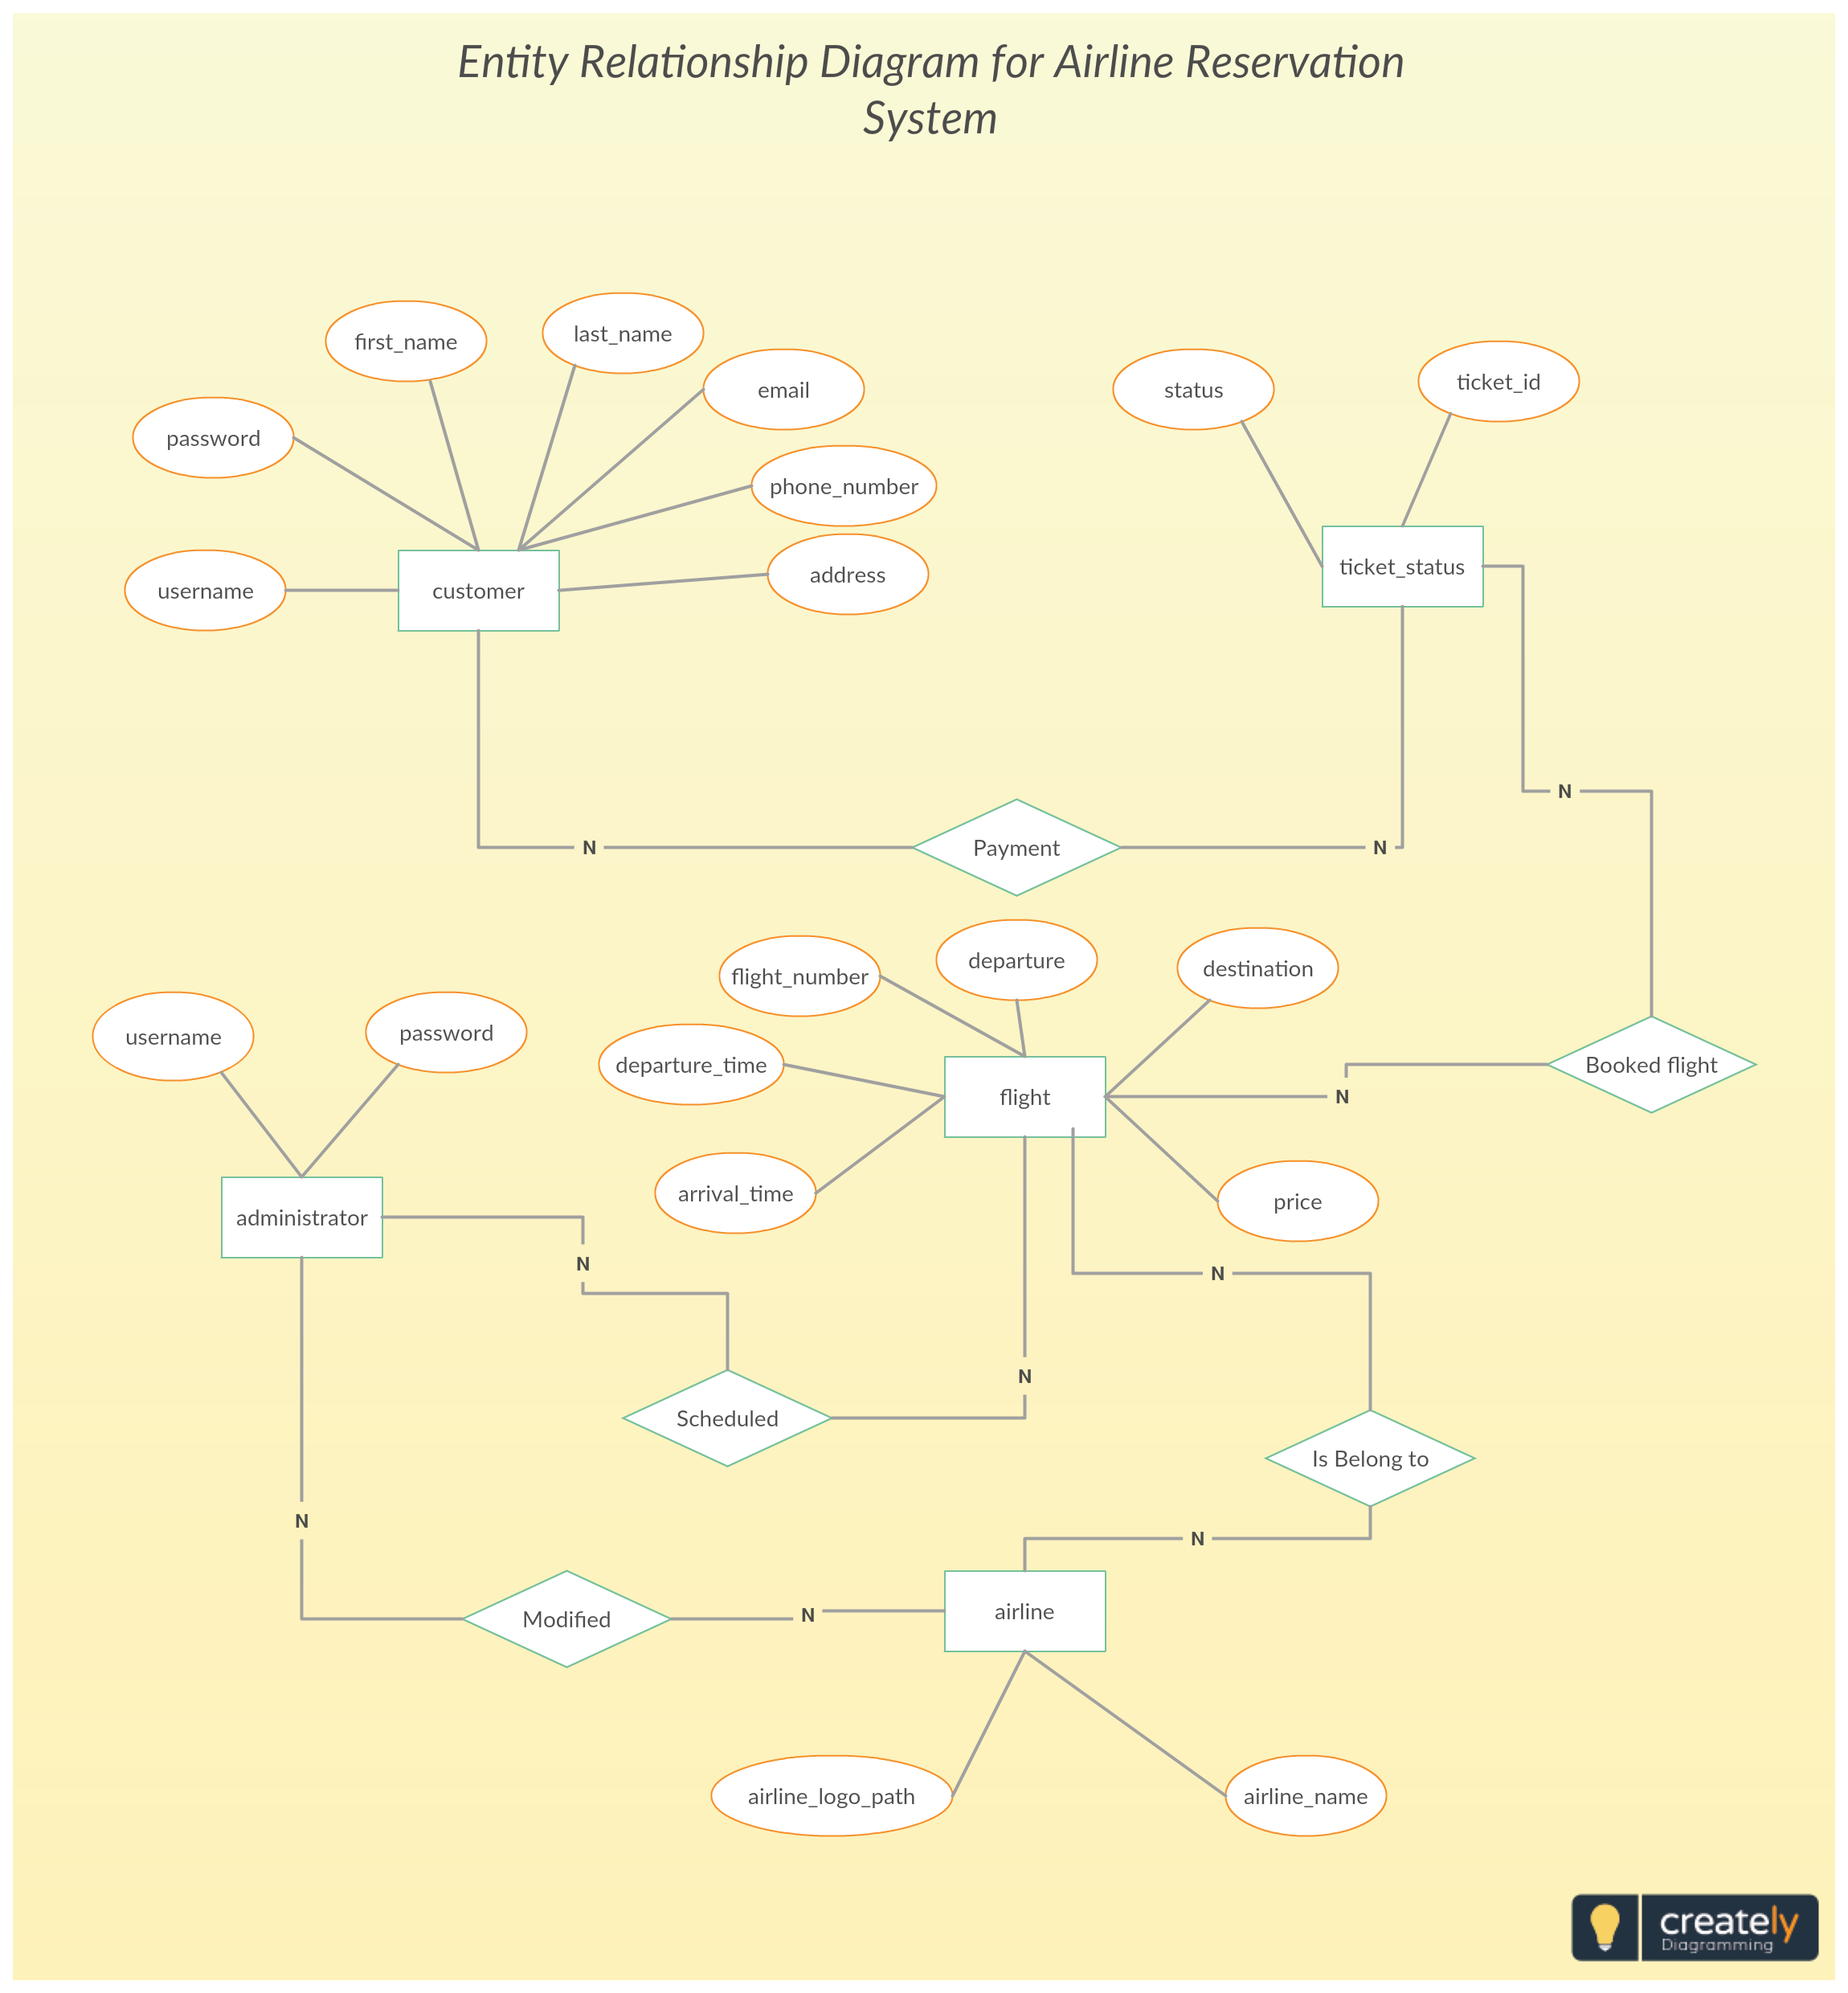 Diagram] Example Entity Relationship Diagrams Airline